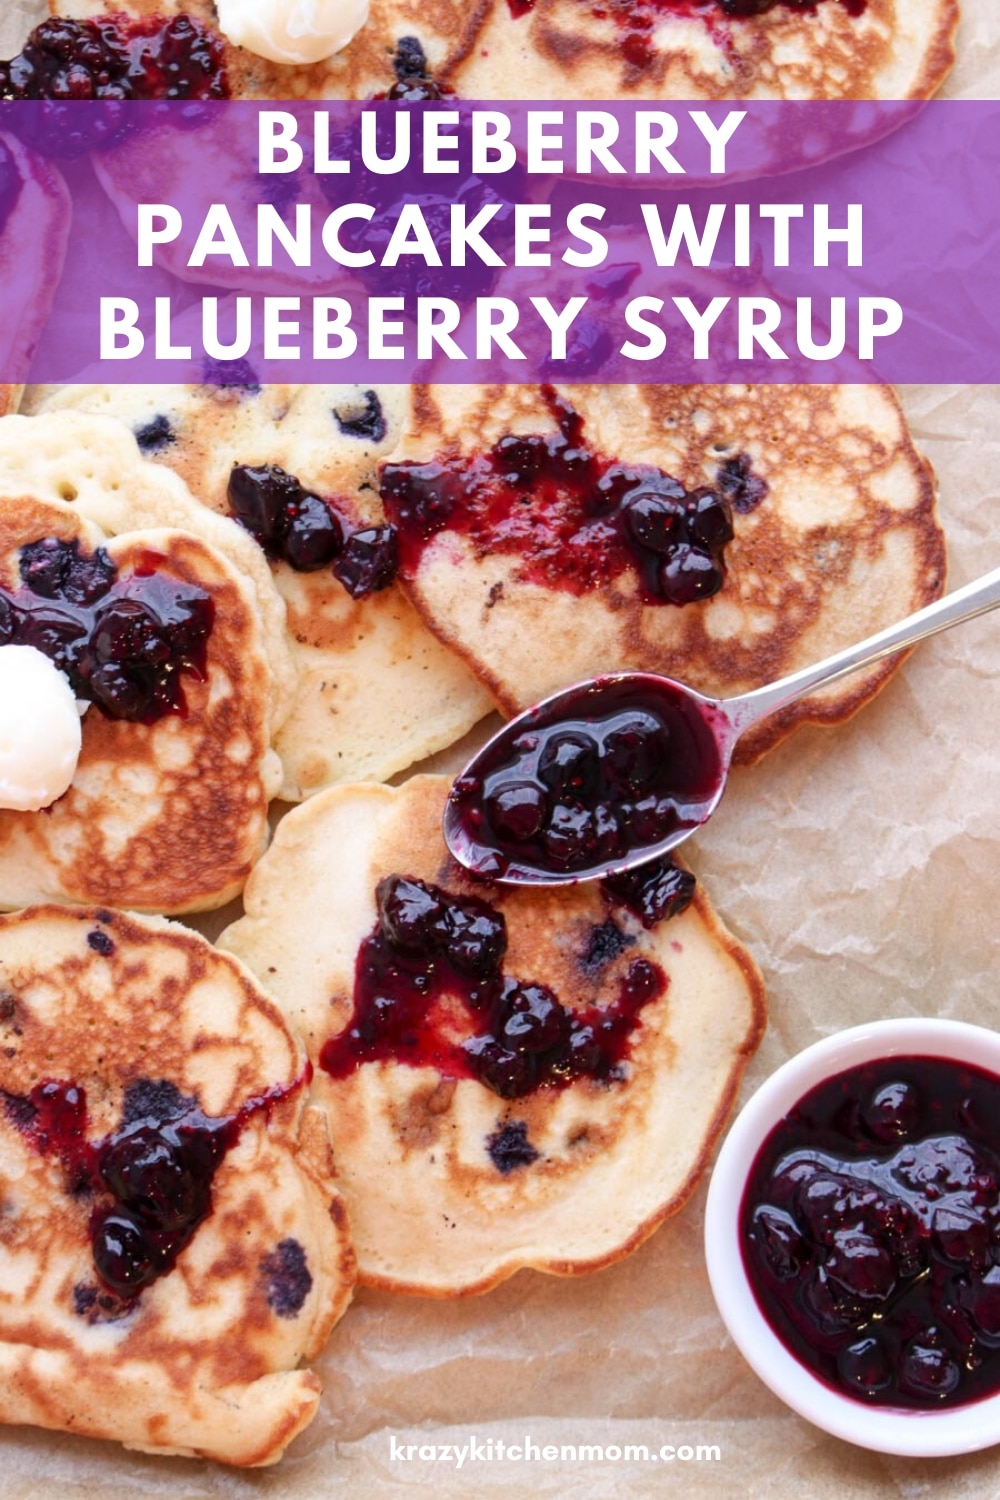 If you love blueberries, you're going to love my Blueberry Pancakes with Blueberry Lemon Syrup recipe. Loaded with fresh blueberries with just the right "zing" from the lemon. via @krazykitchenmom